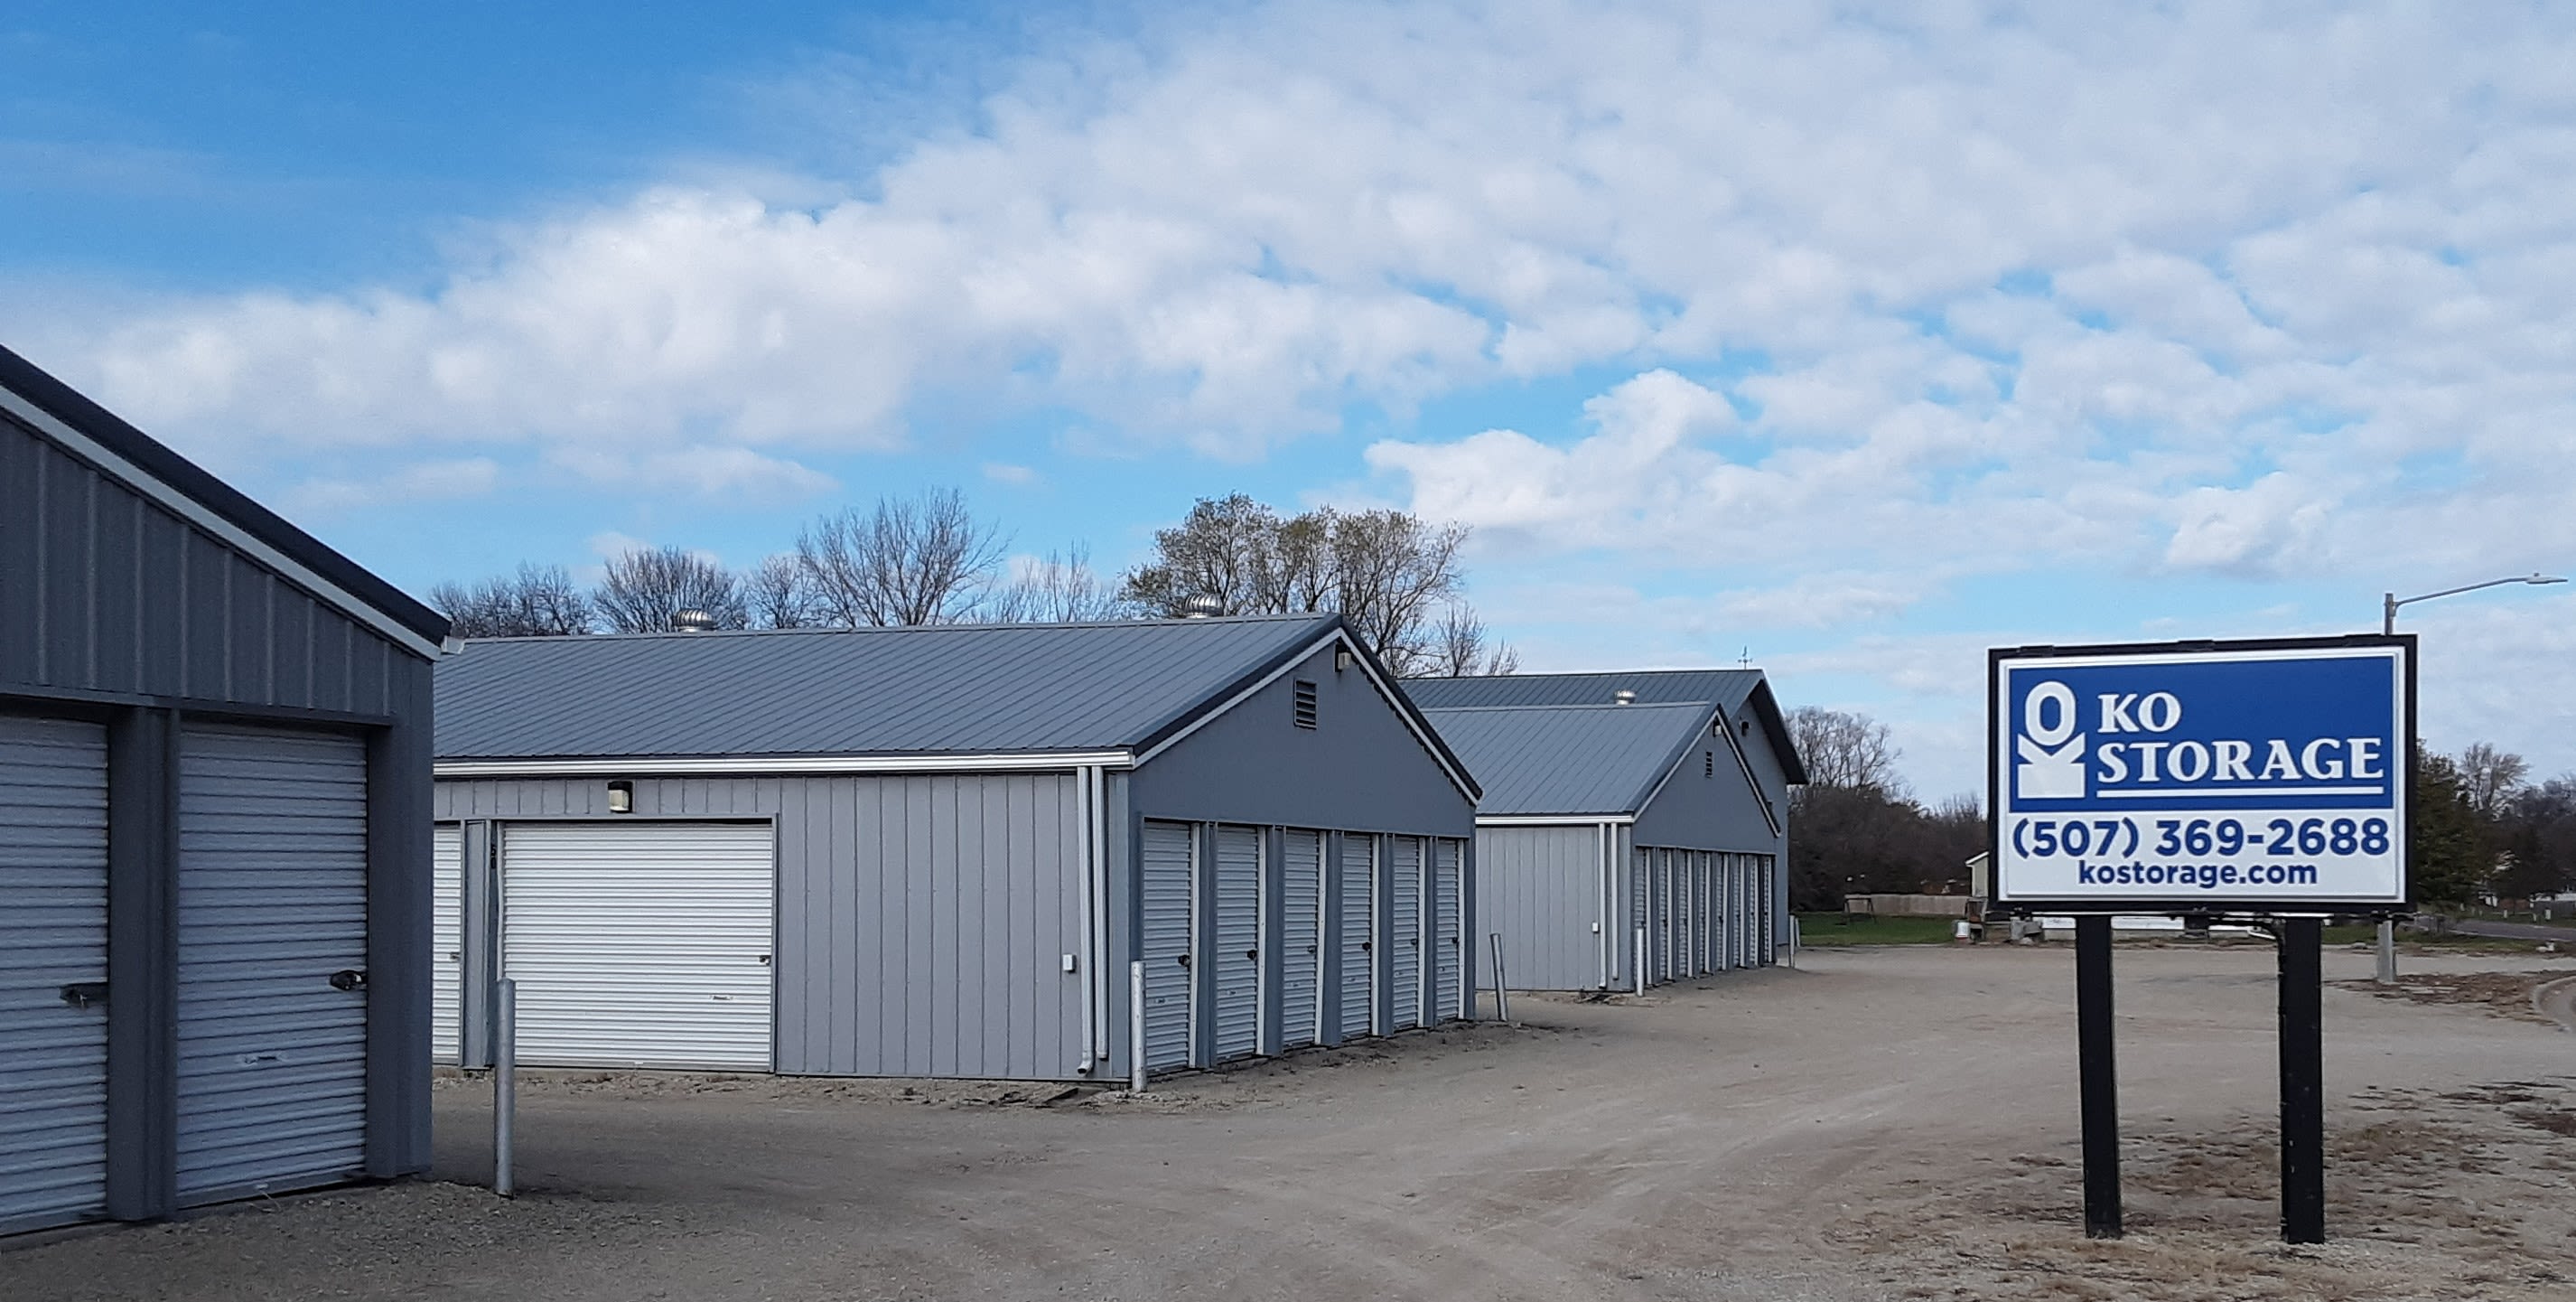 Map and directions to KO Storage in Waseca, Minnesota